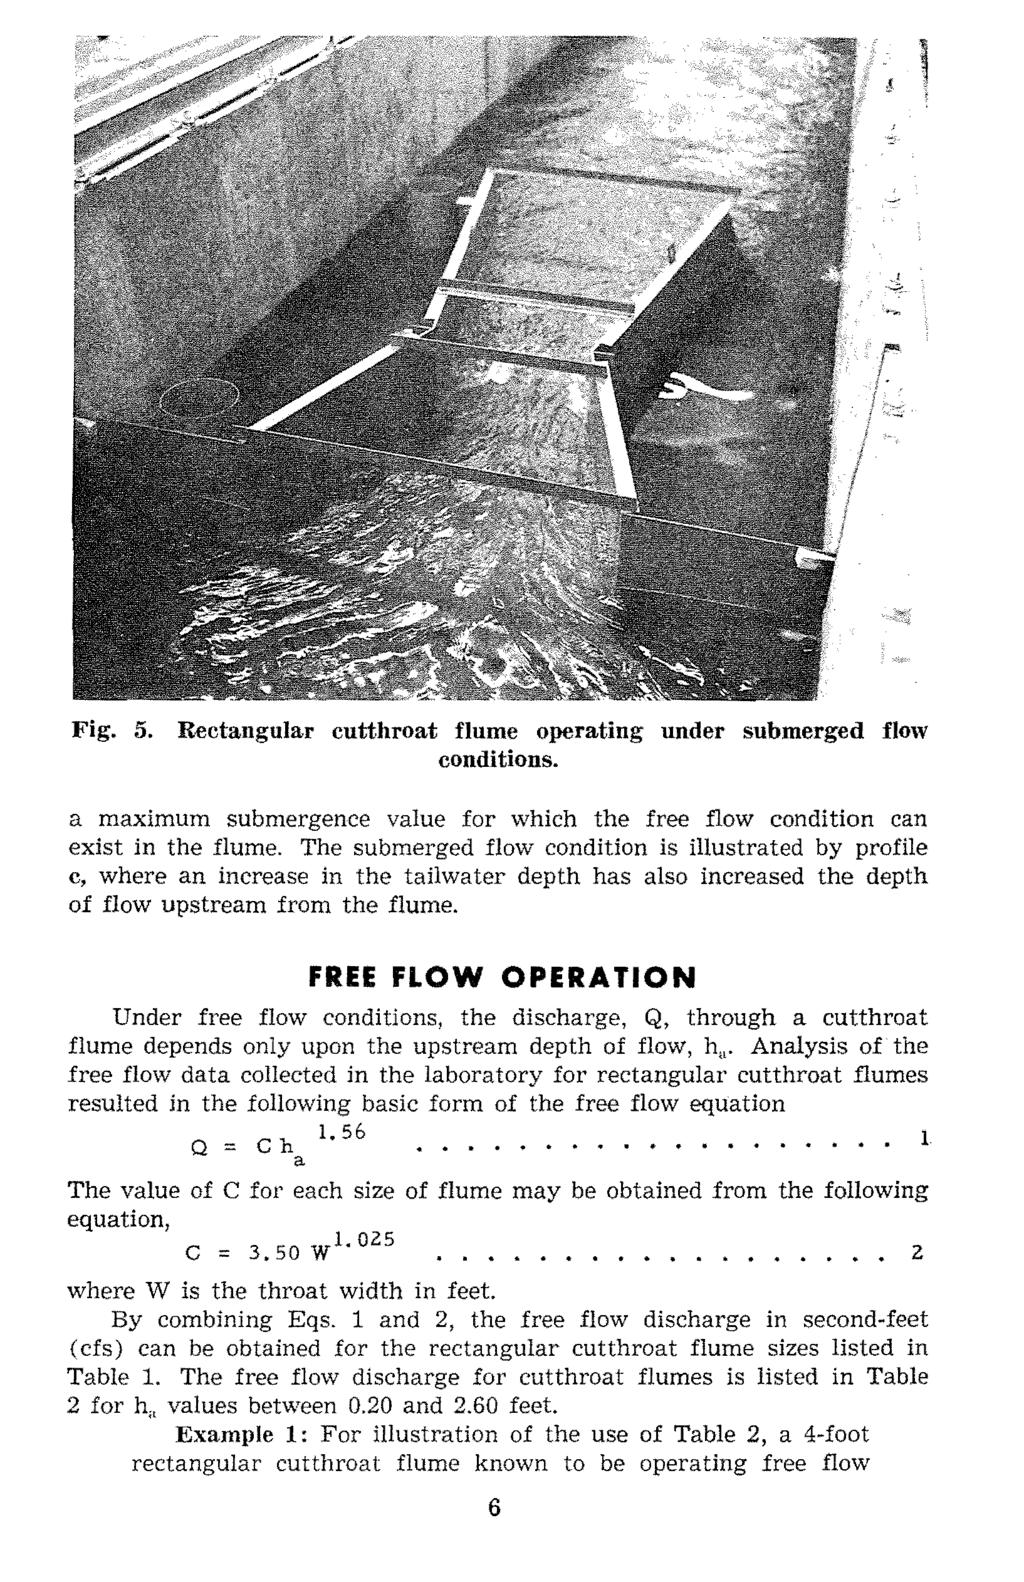 Fig. 5. Rectngulr cutthrot flume operting under submerged flow couditions. mximum submergence vlue for which the free flow condition cn exist in the flume.